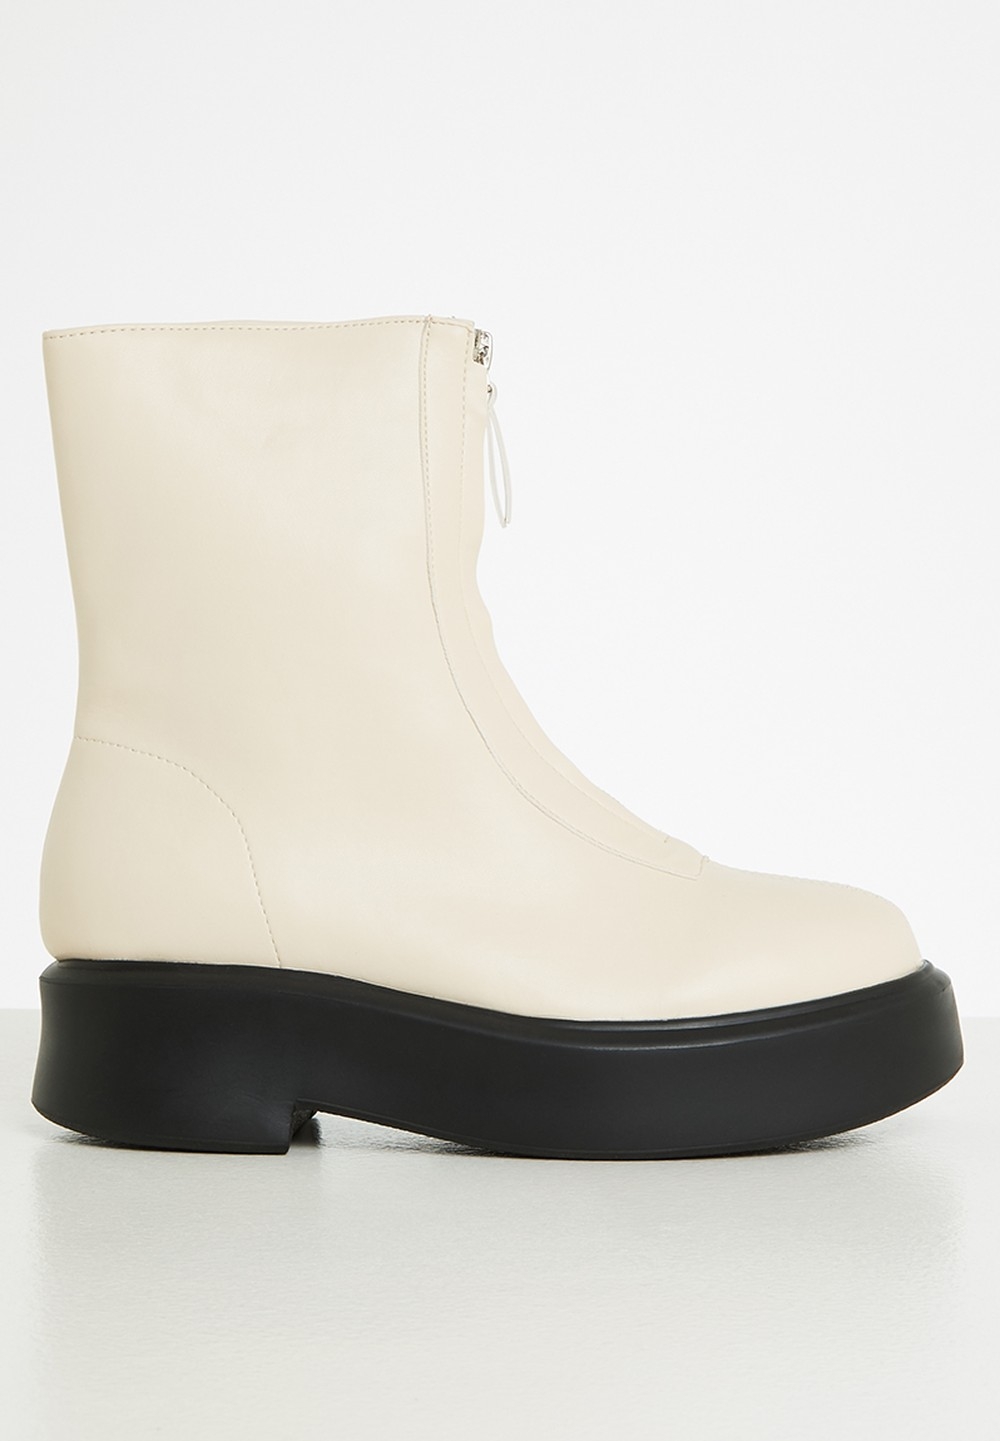 MyRunway | Shop edit Tammy chelsea boot - natural for Women from ...